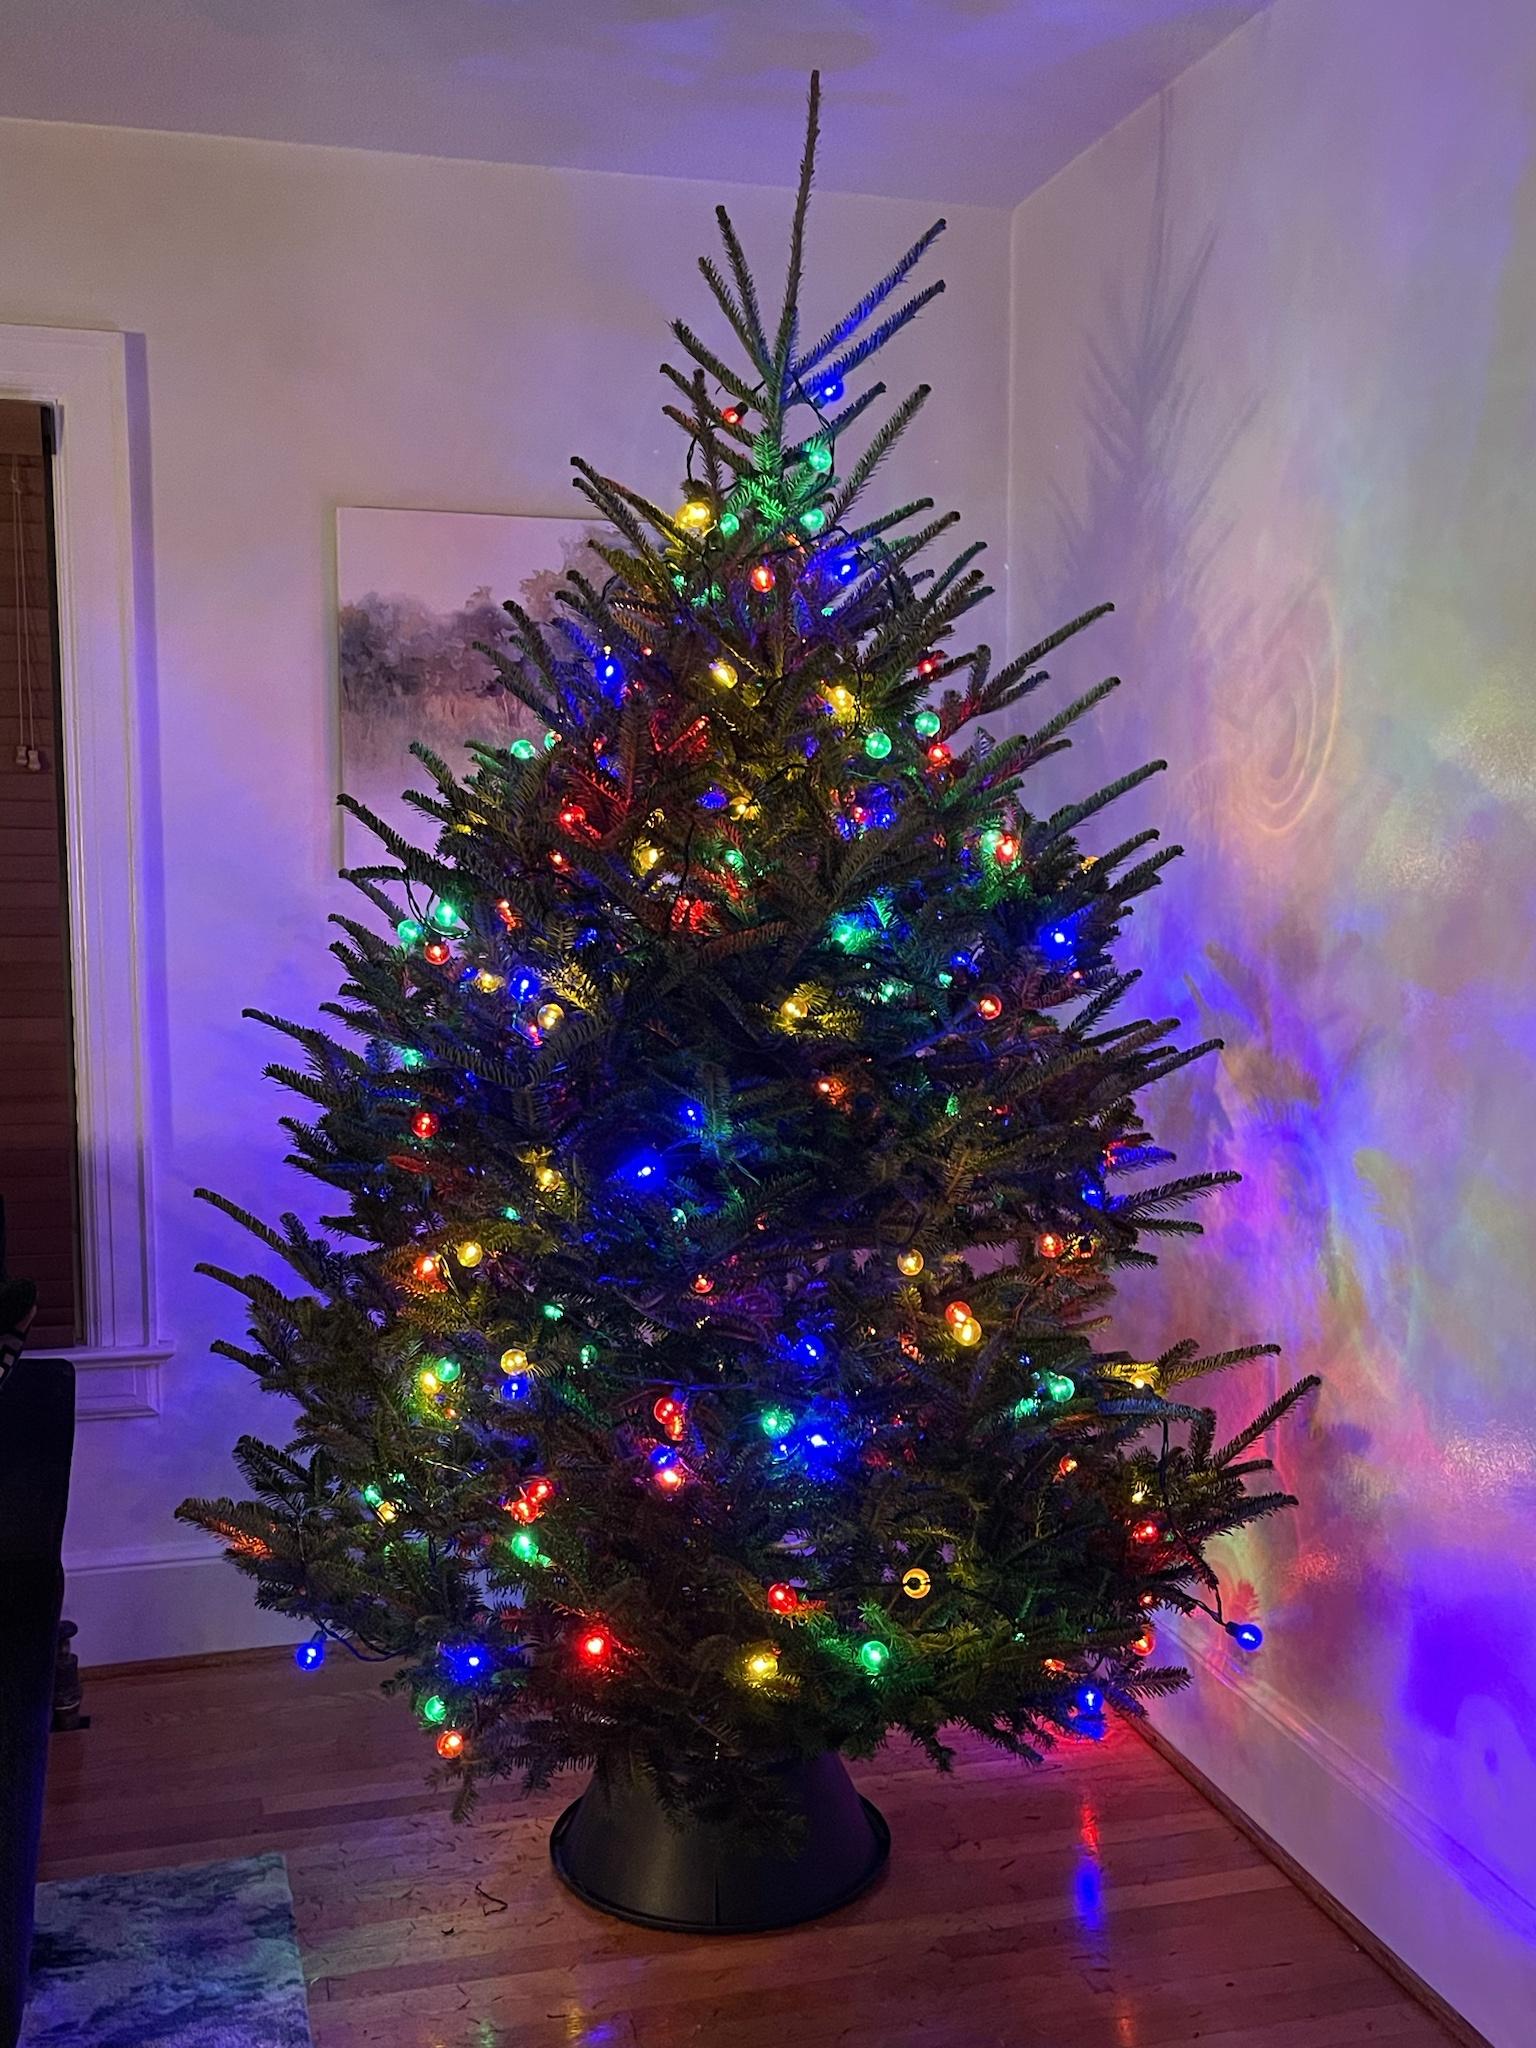 our first exact Christmas tree